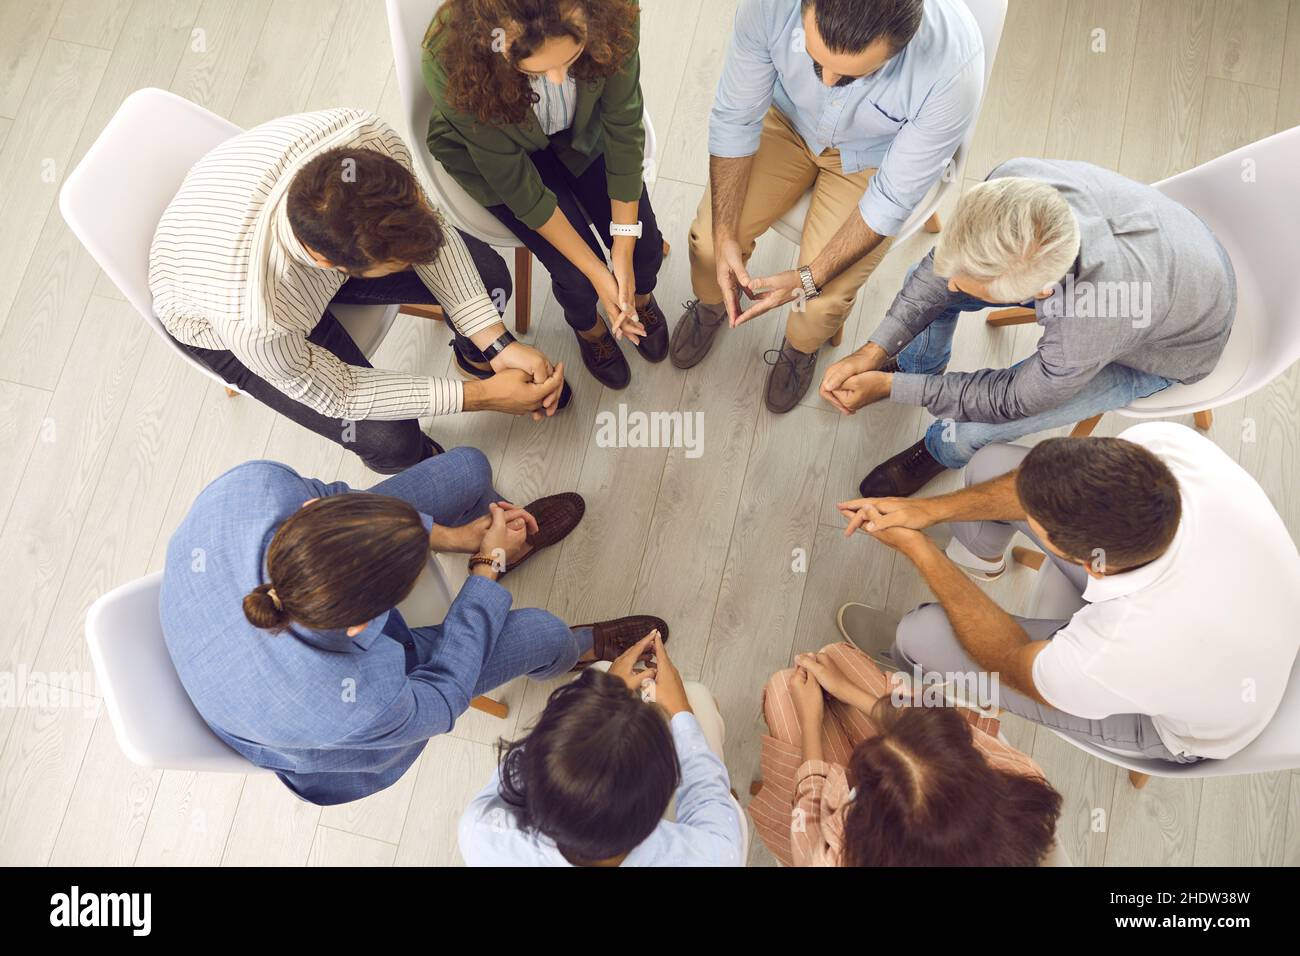 Overhead view of group of people sitting in circle during therapy session with psychiatrist Stock Photo